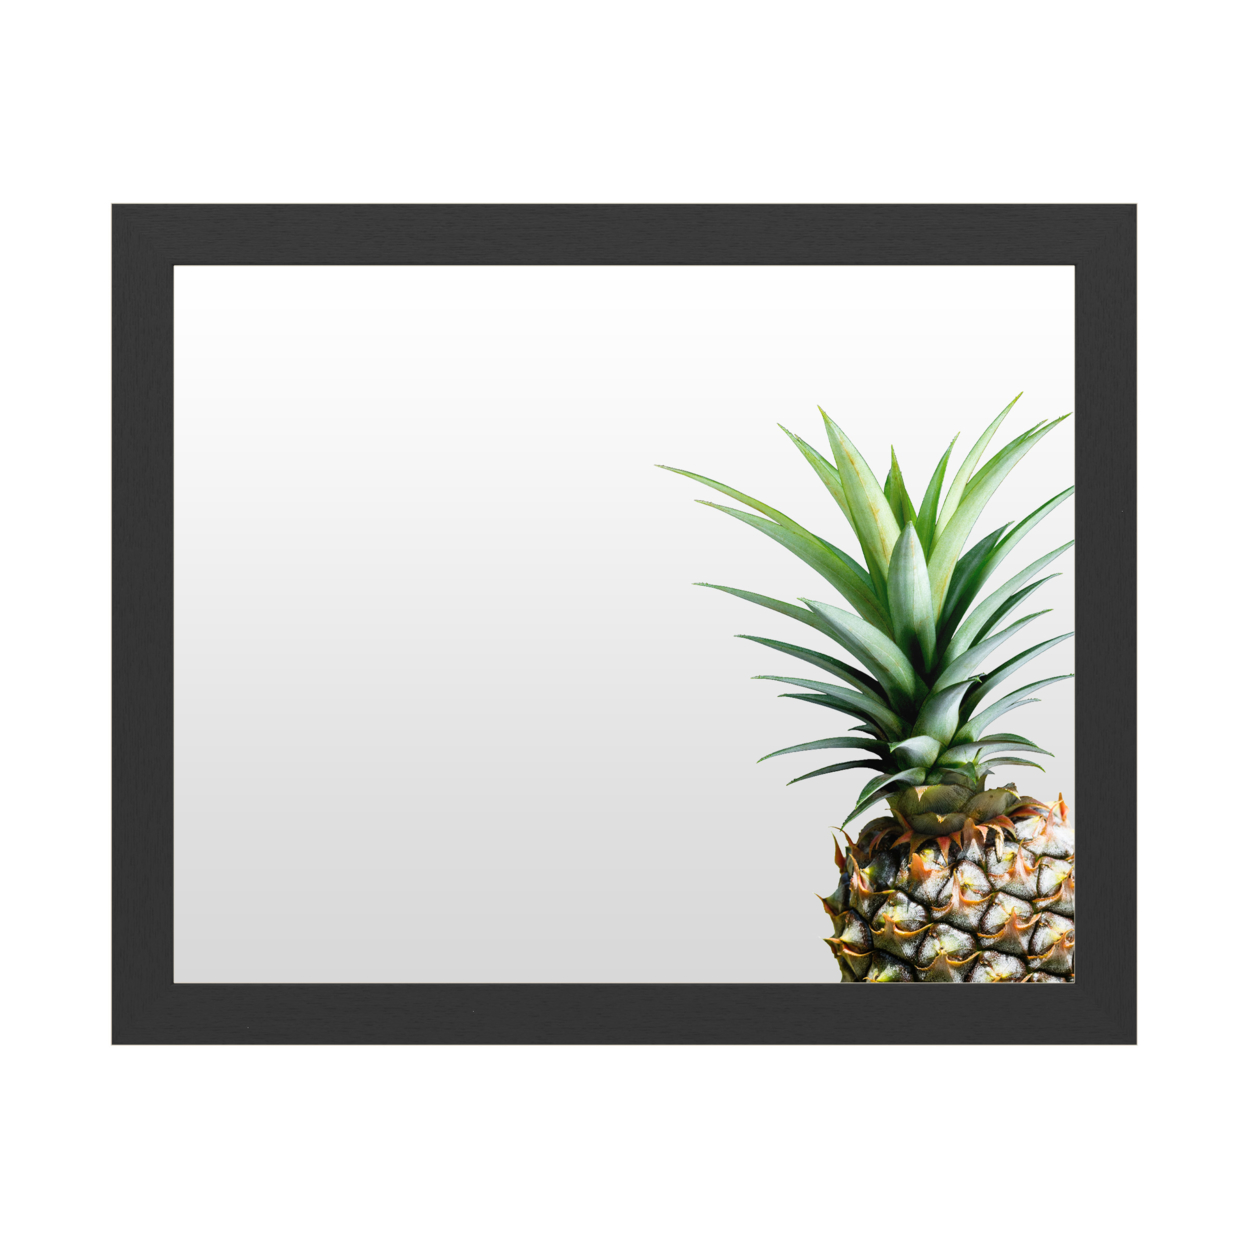 Dry Erase 16 X 20 Marker Board With Printed Artwork - Lexie Gree Pineapple Color White Board - Ready To Hang